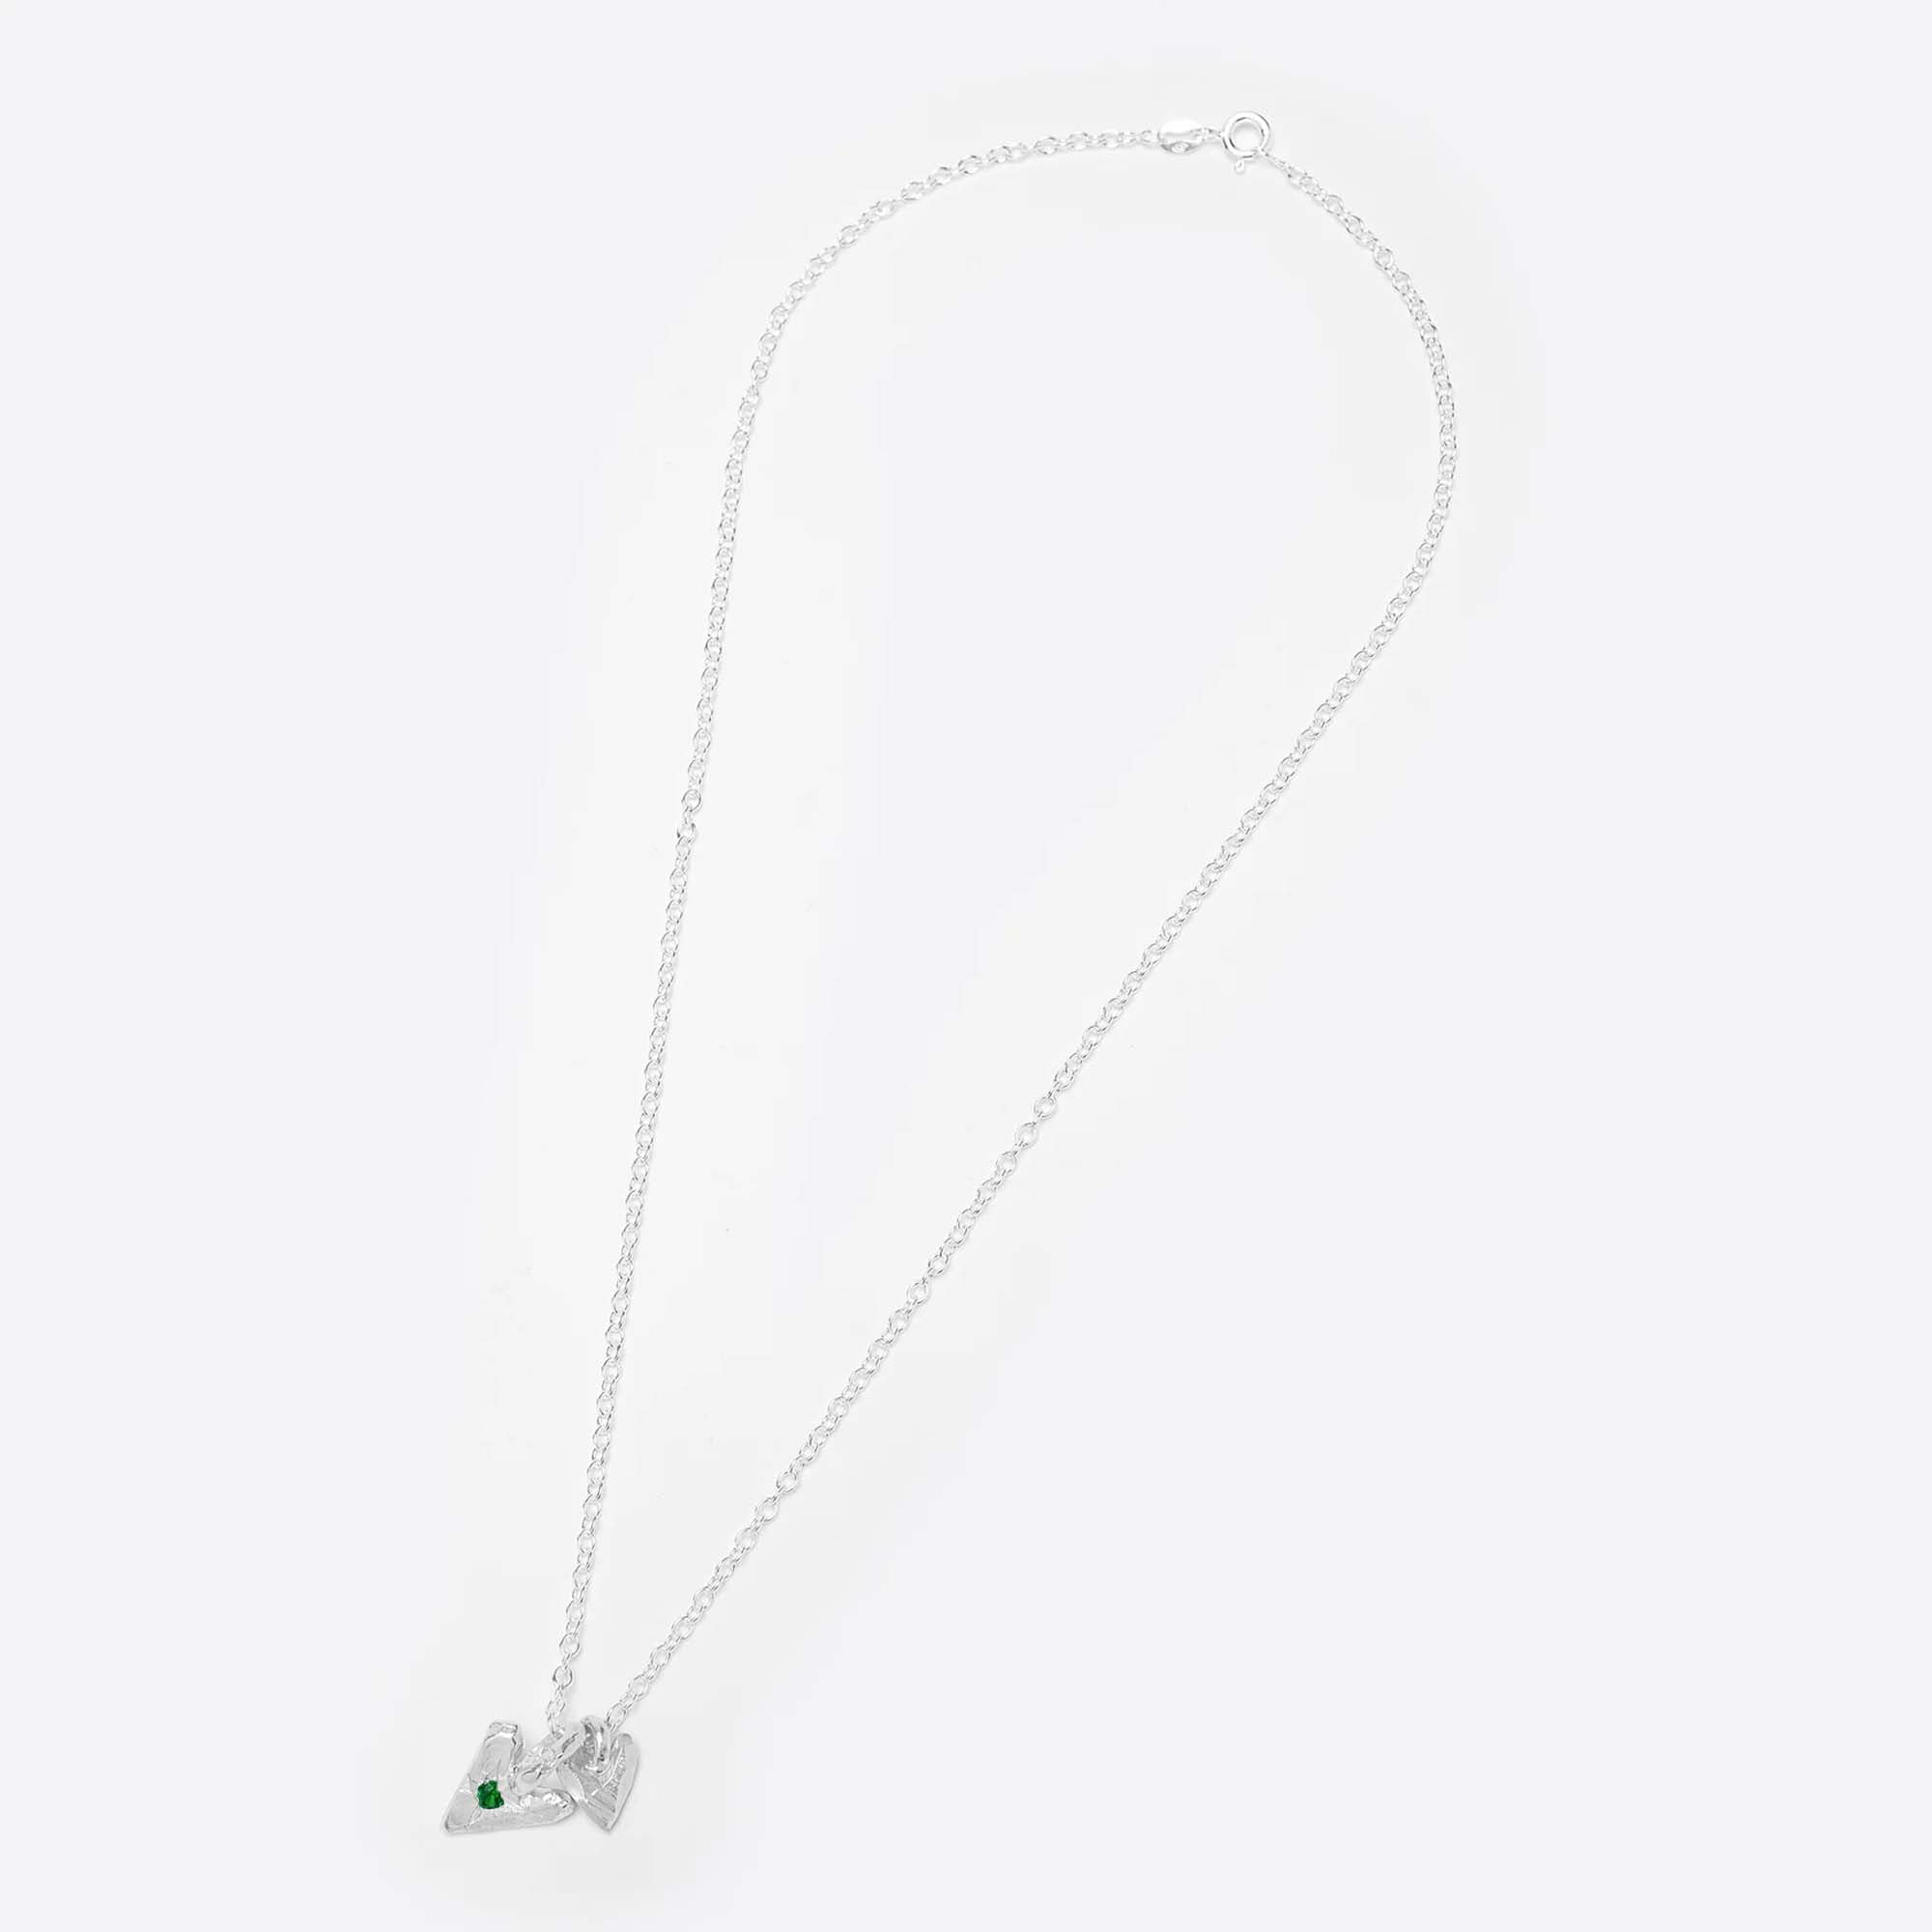 SIBLING EMERALD HEARTS NECKLACE